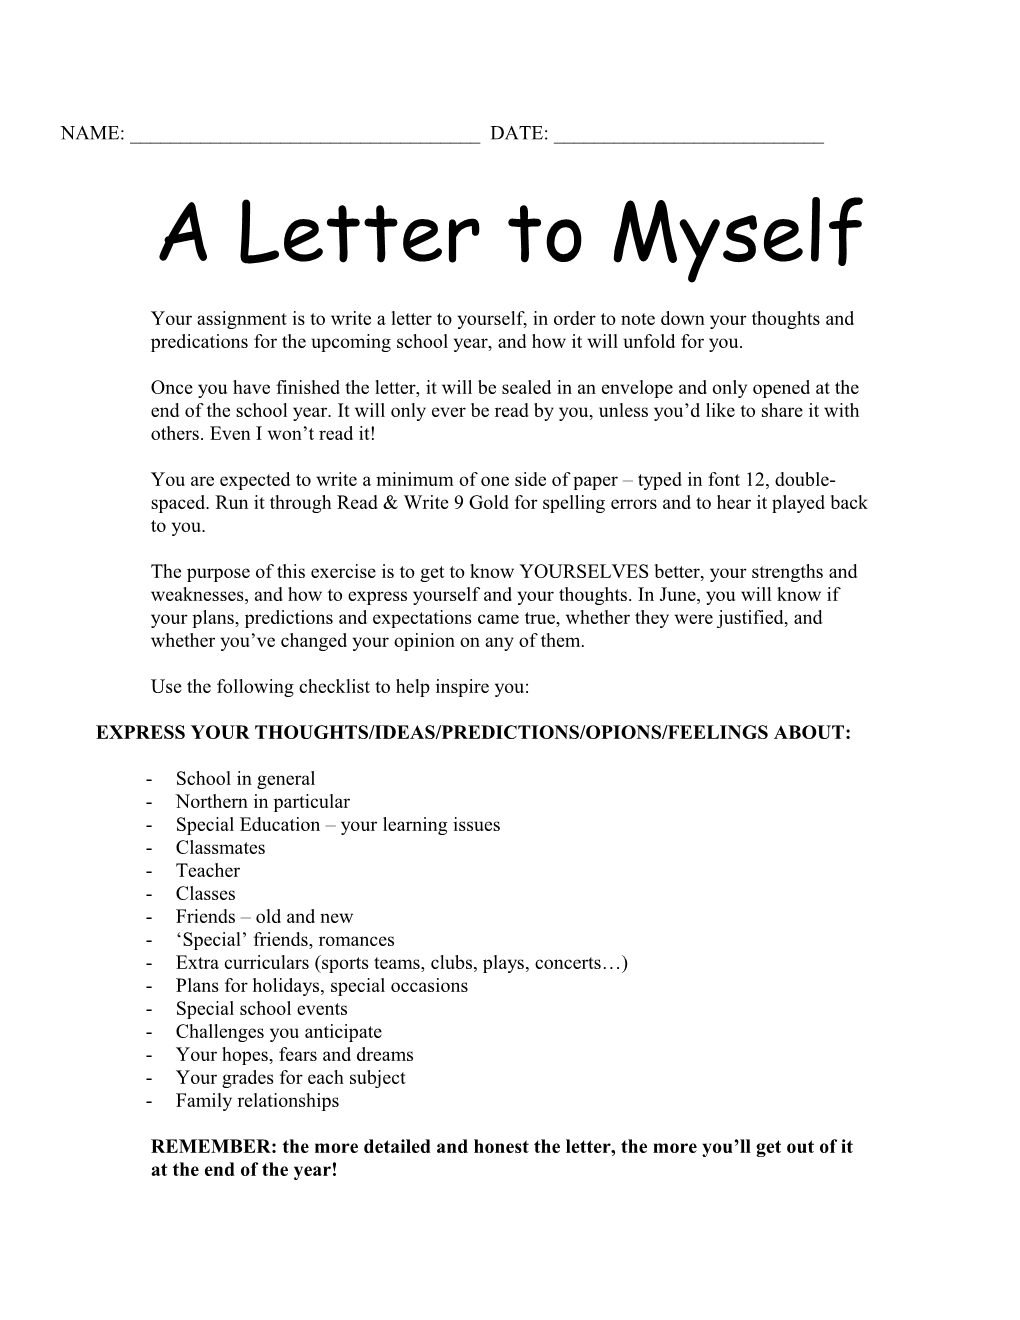 A Letter to Myself